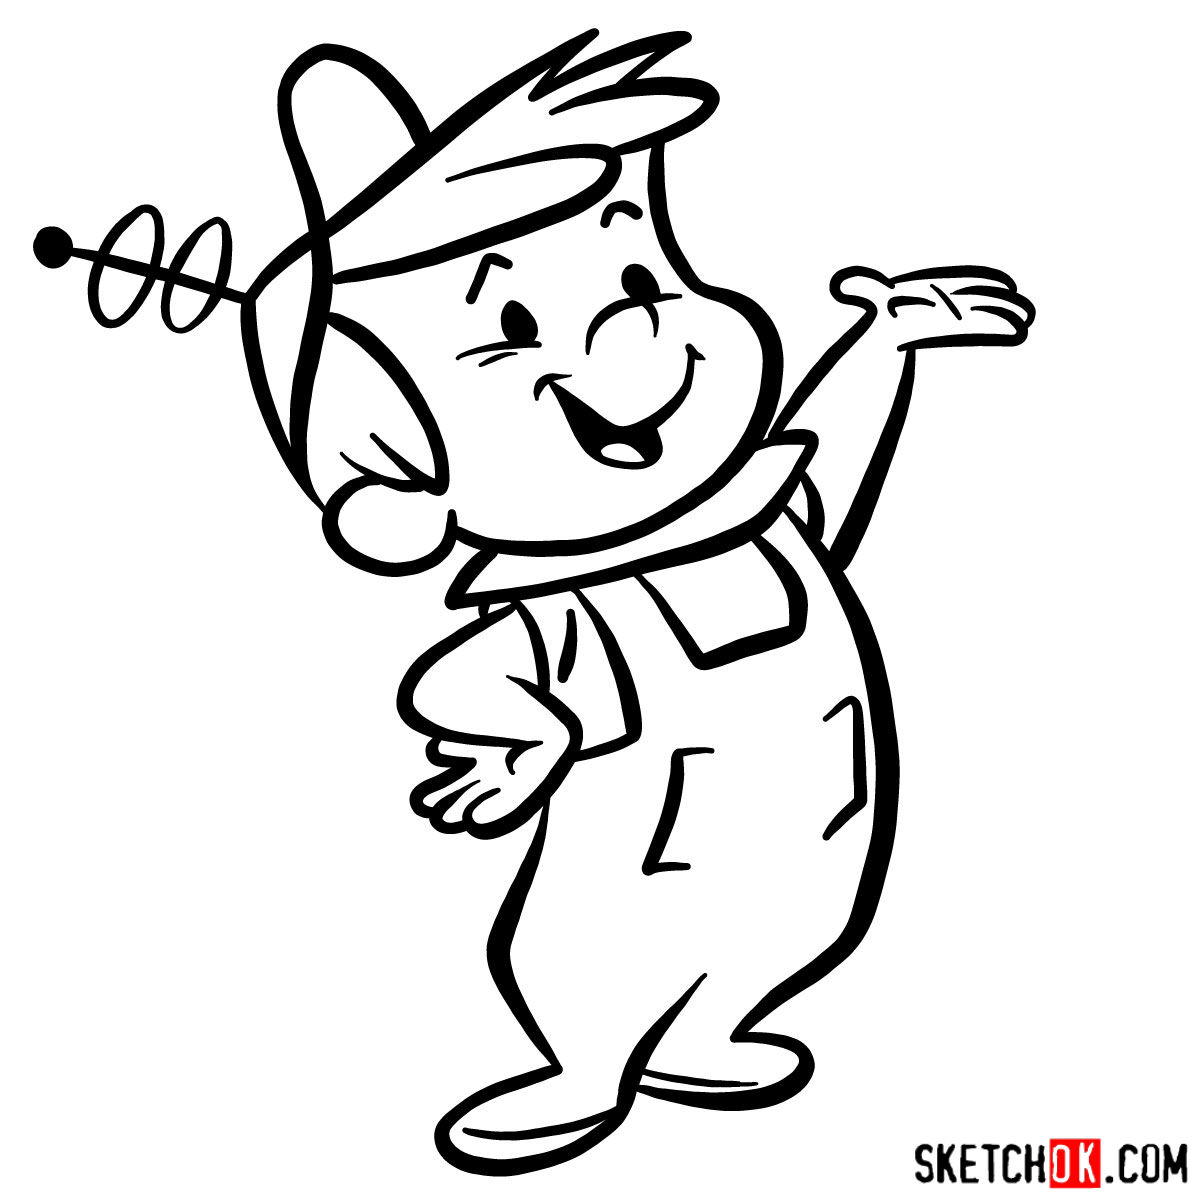 How to draw Elroy Jetson - step 10